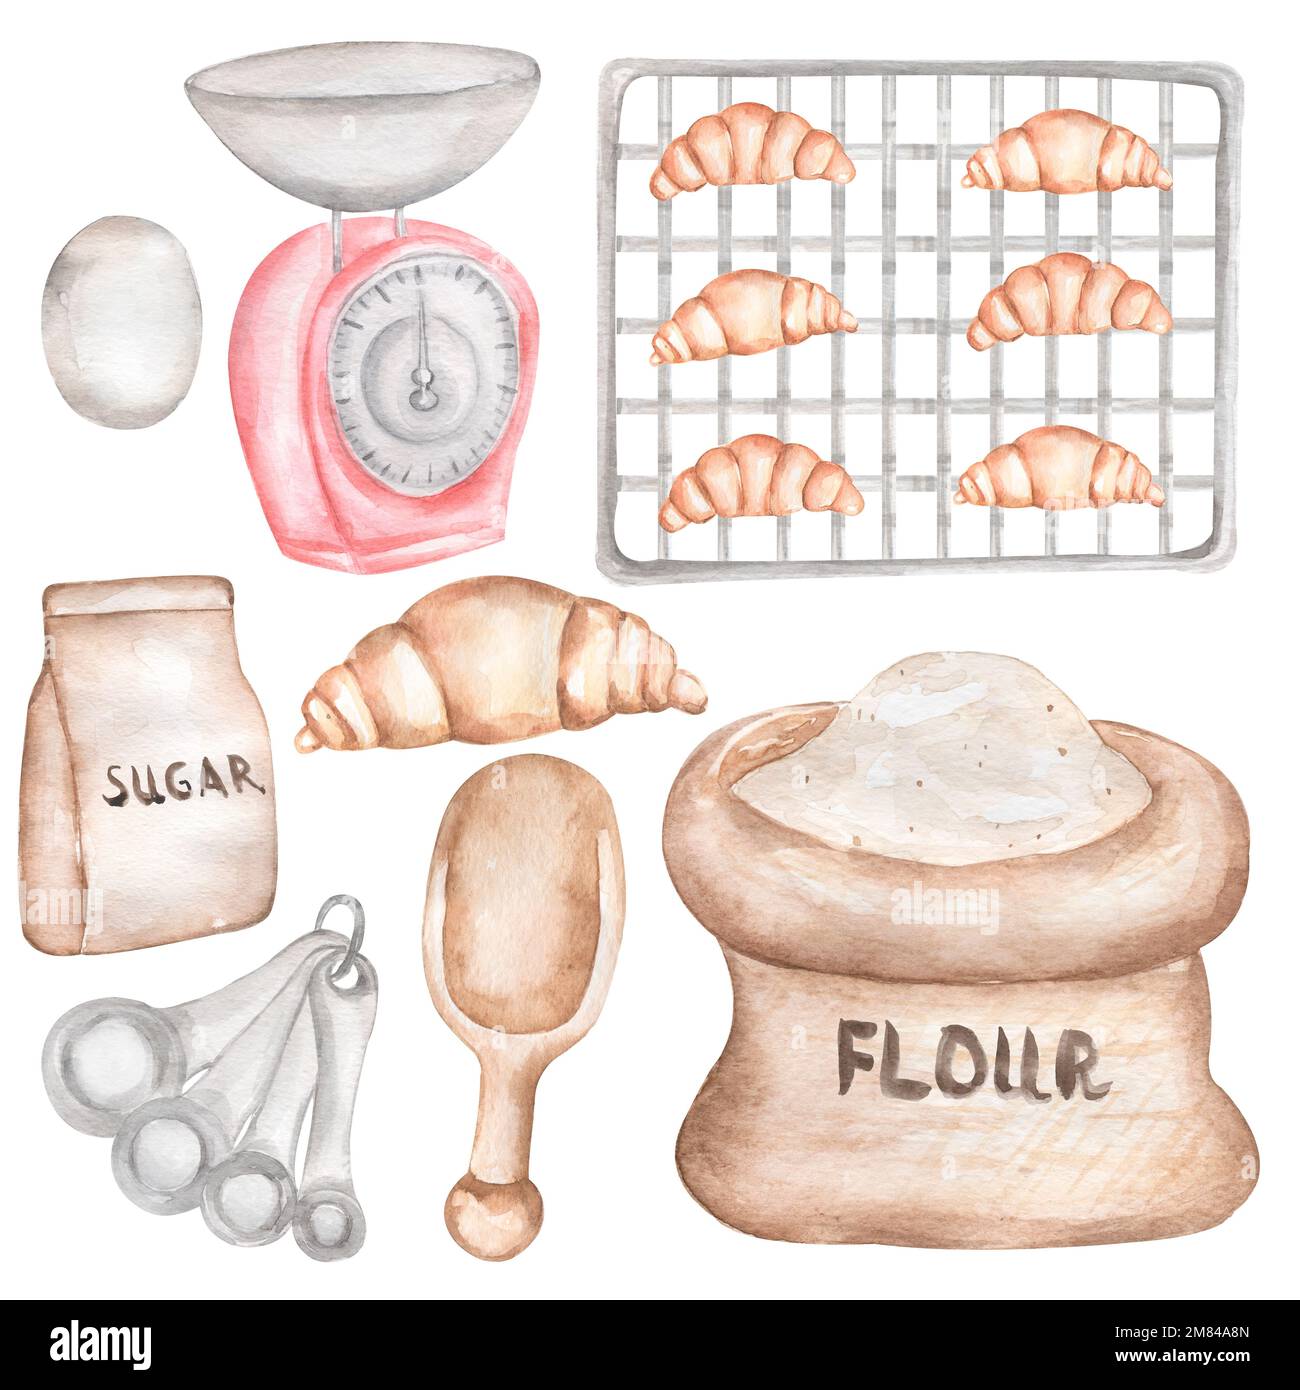 https://c8.alamy.com/comp/2M84A8N/watercolor-hand-drawn-baking-set-clipart-bakery-supplies-illustration-cooking-culinary-clipart-kitchen-foods-utensils-ingredients-baker-cookies-2M84A8N.jpg